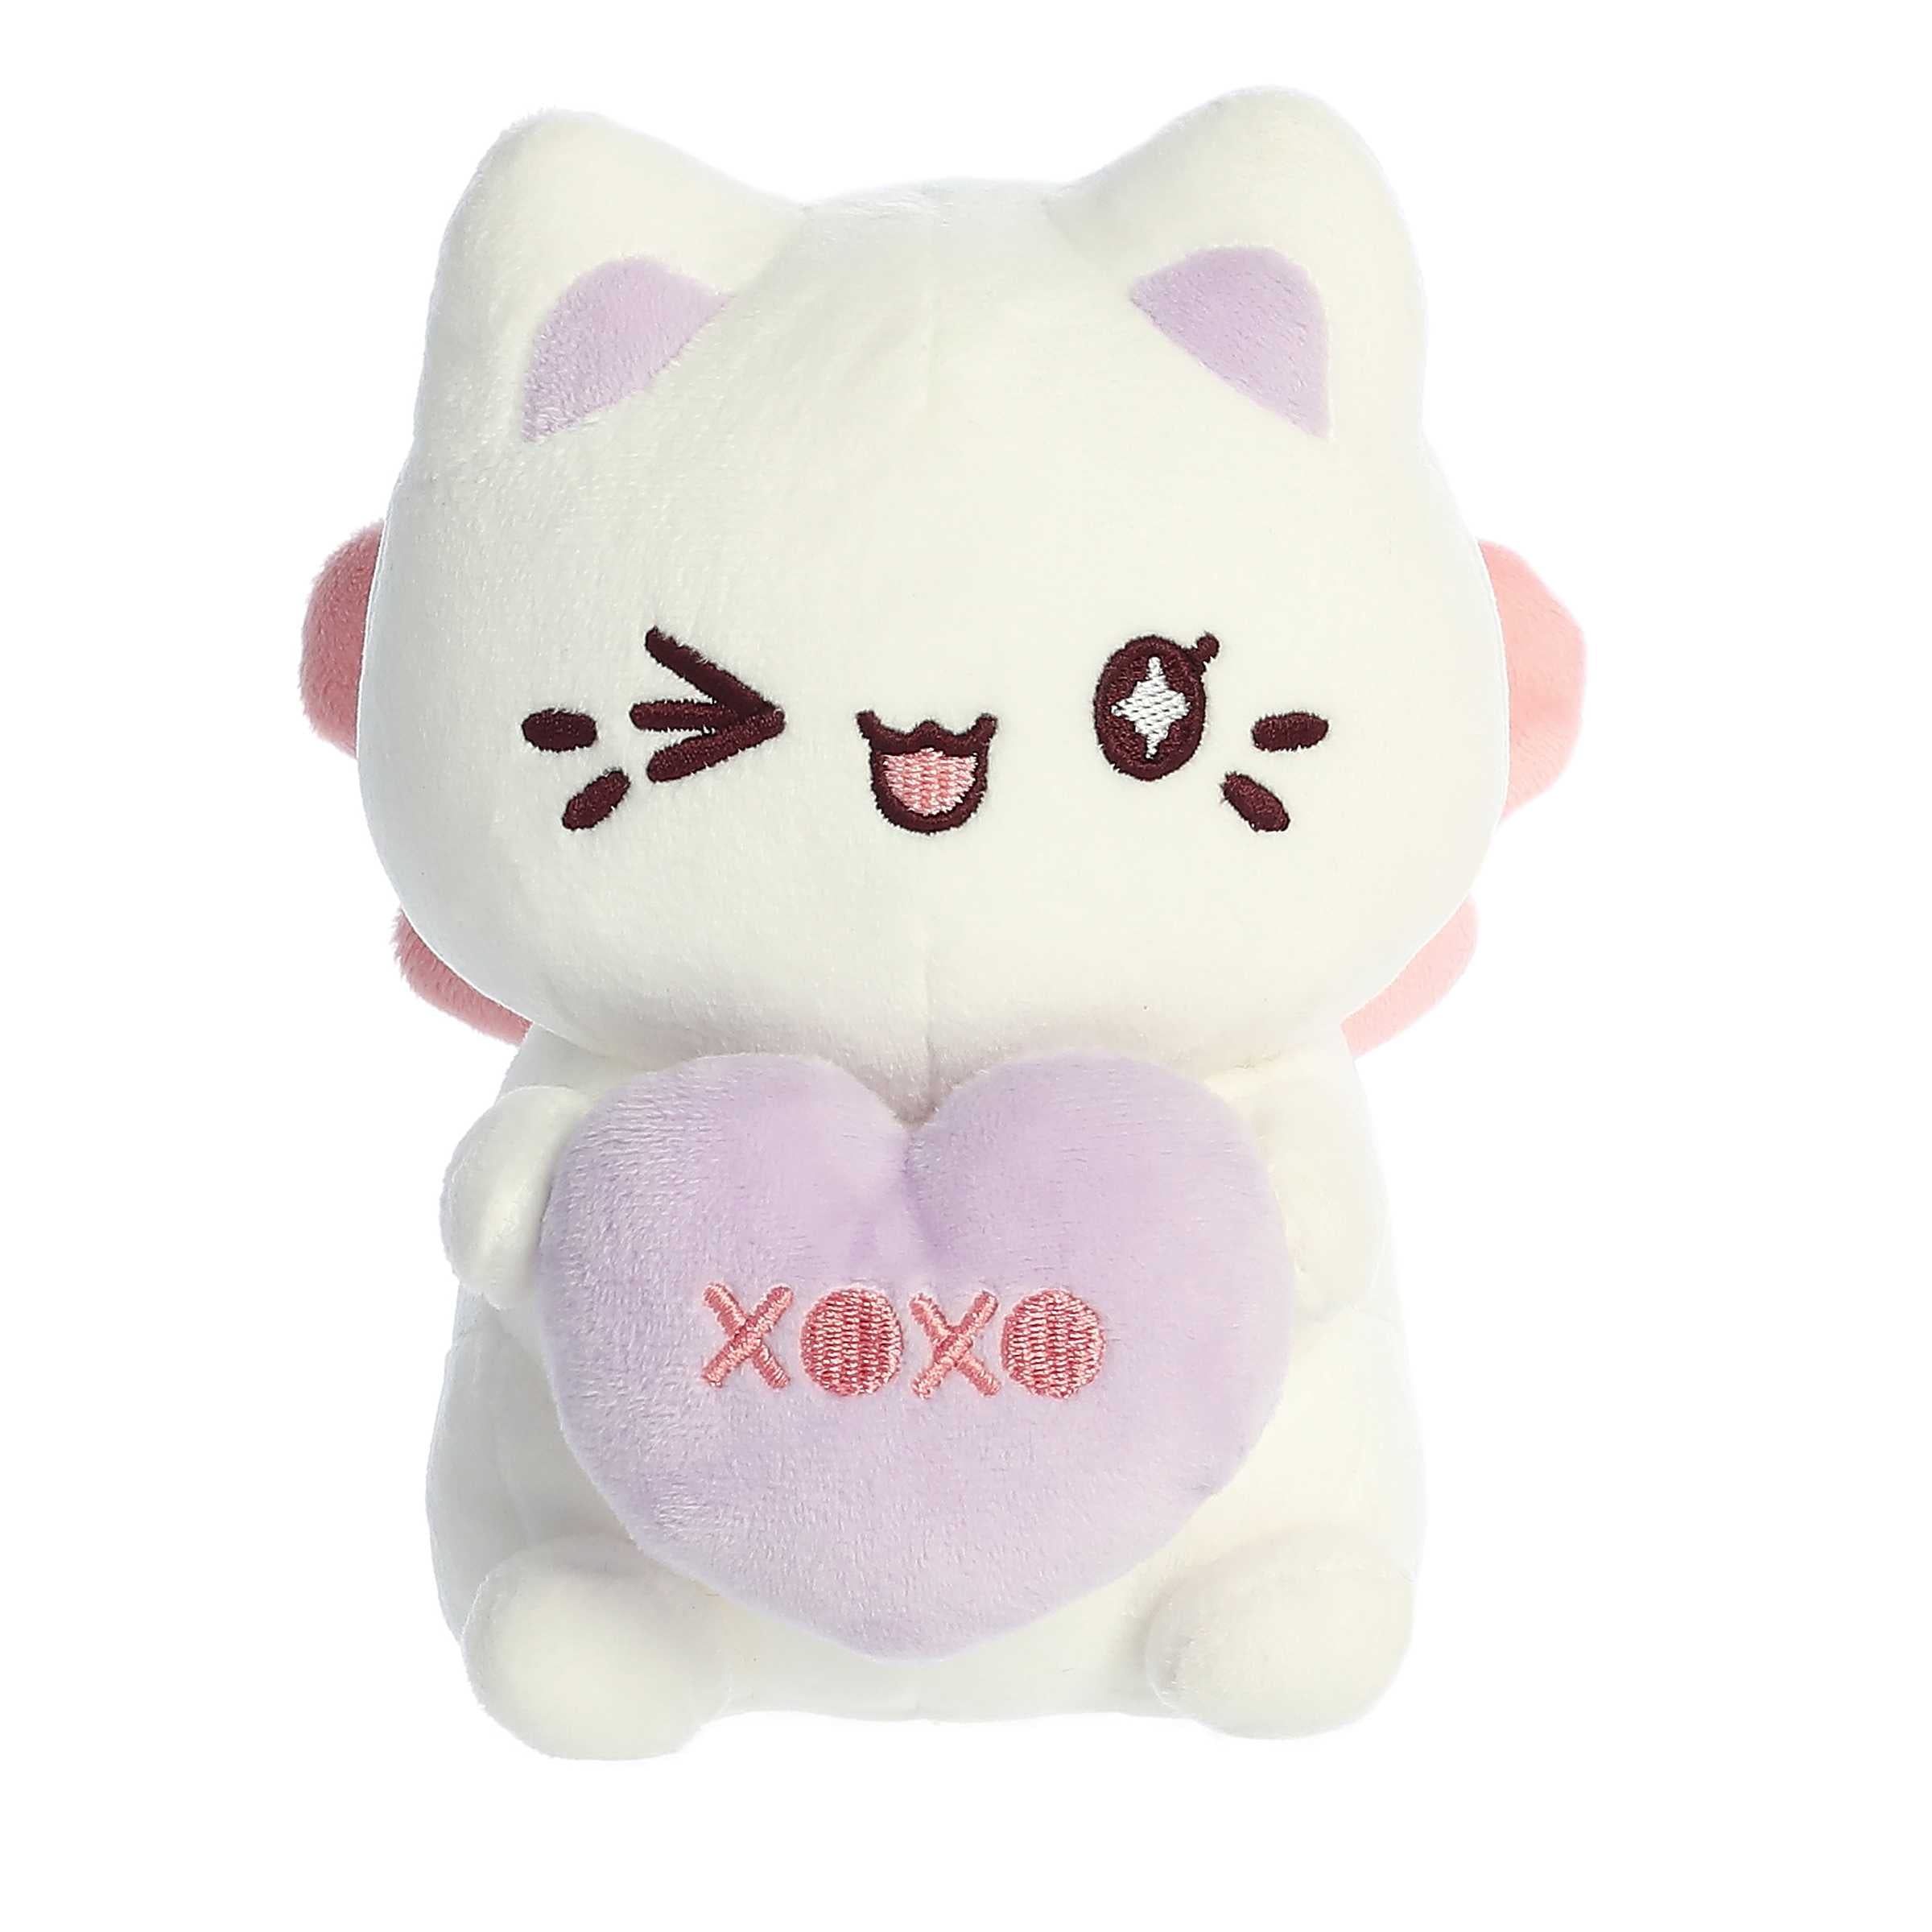 White Candy Heart Sitting Mewochi with pink angel wings holding "xoxo" candy, from Tasty Peach Valentine plushies